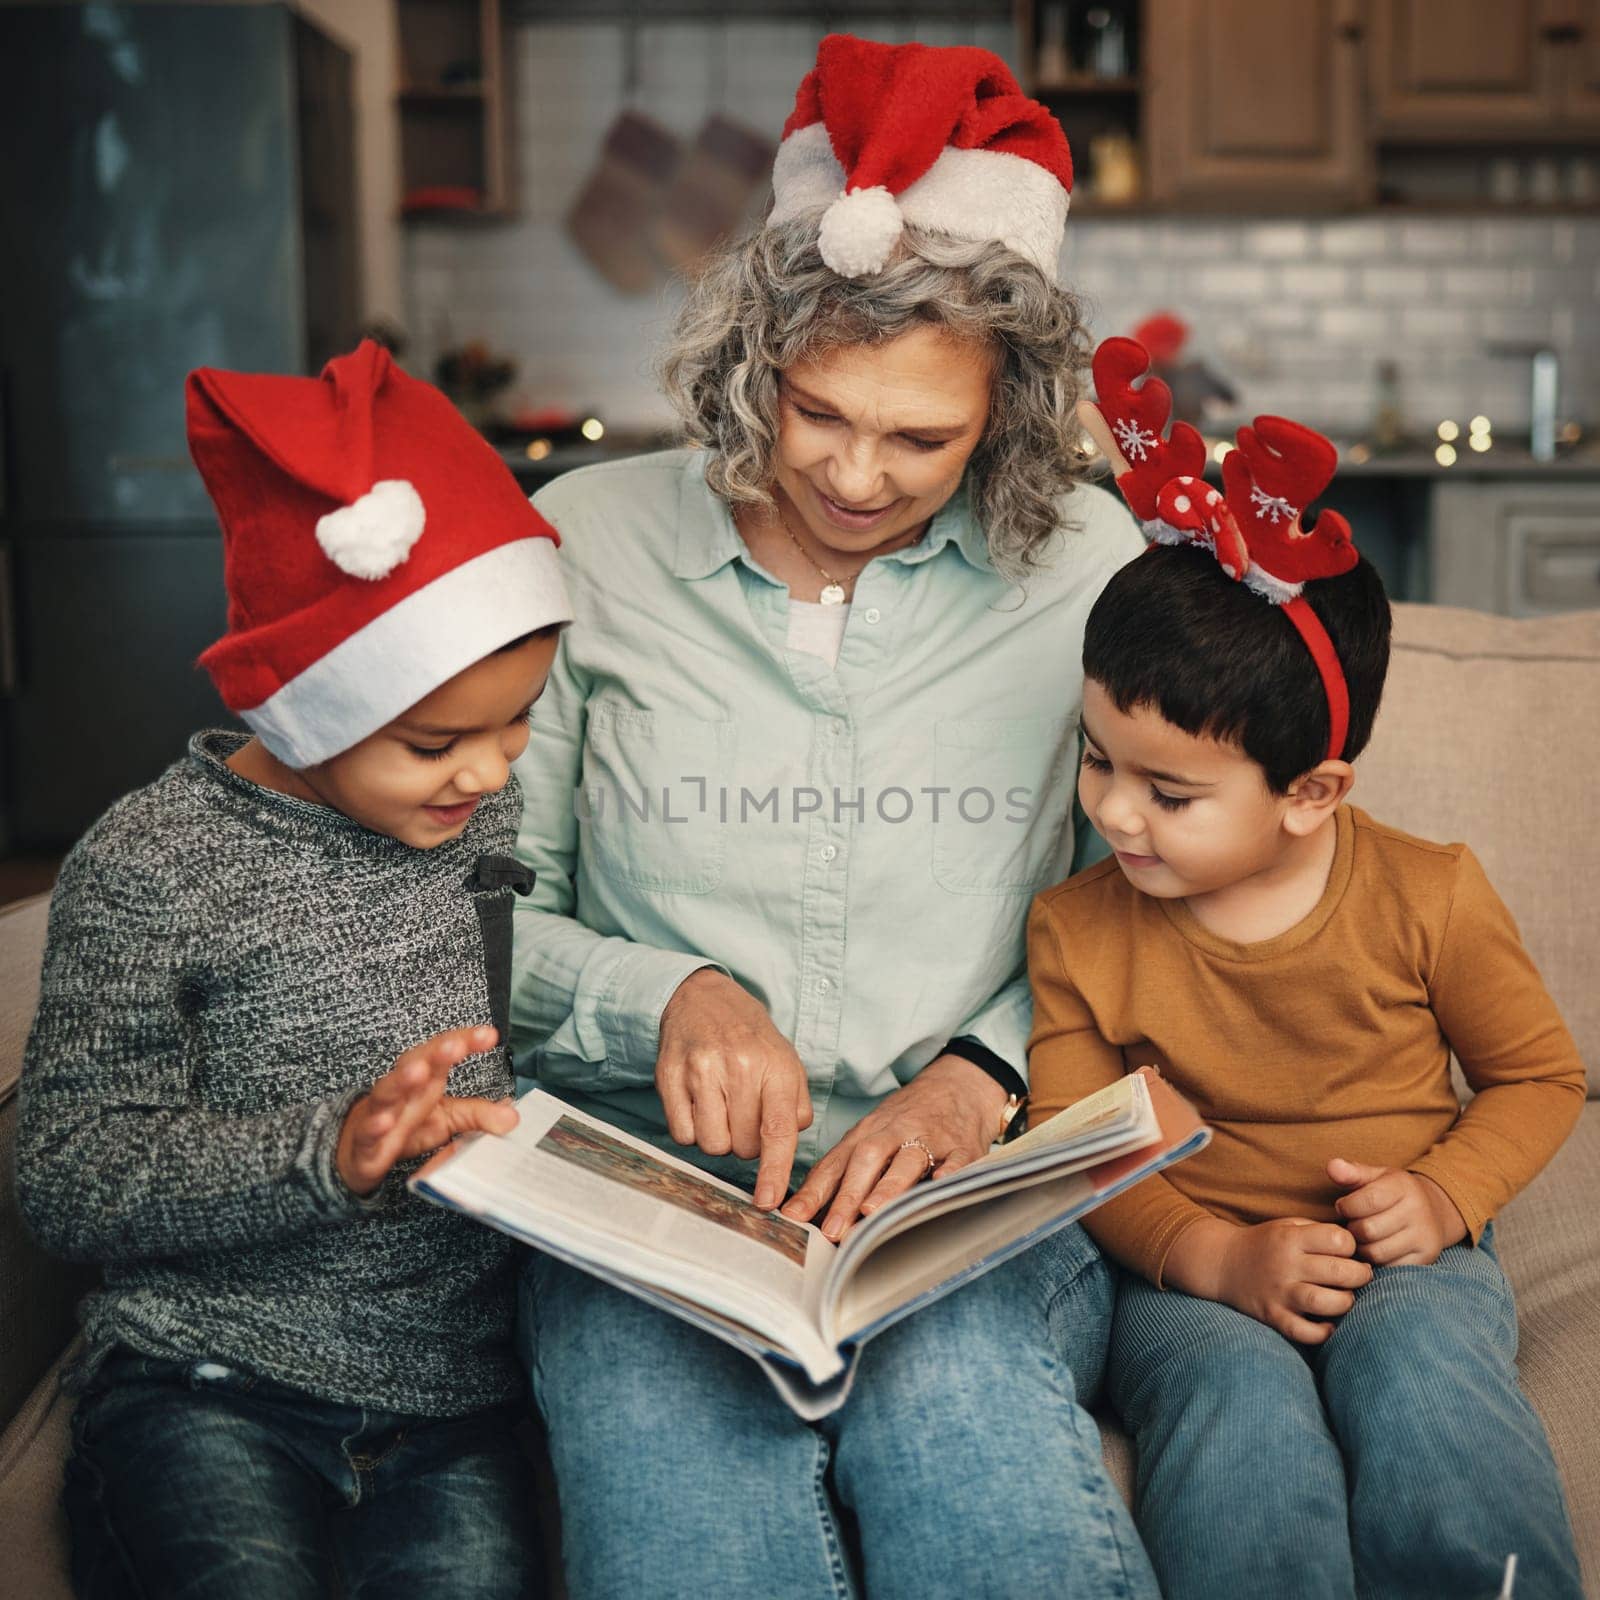 Christmas, books or reading with a grandmother and kids looking at photographs during festive season. Family, love or celebration with a senior woman and grandchildren holding a story book.